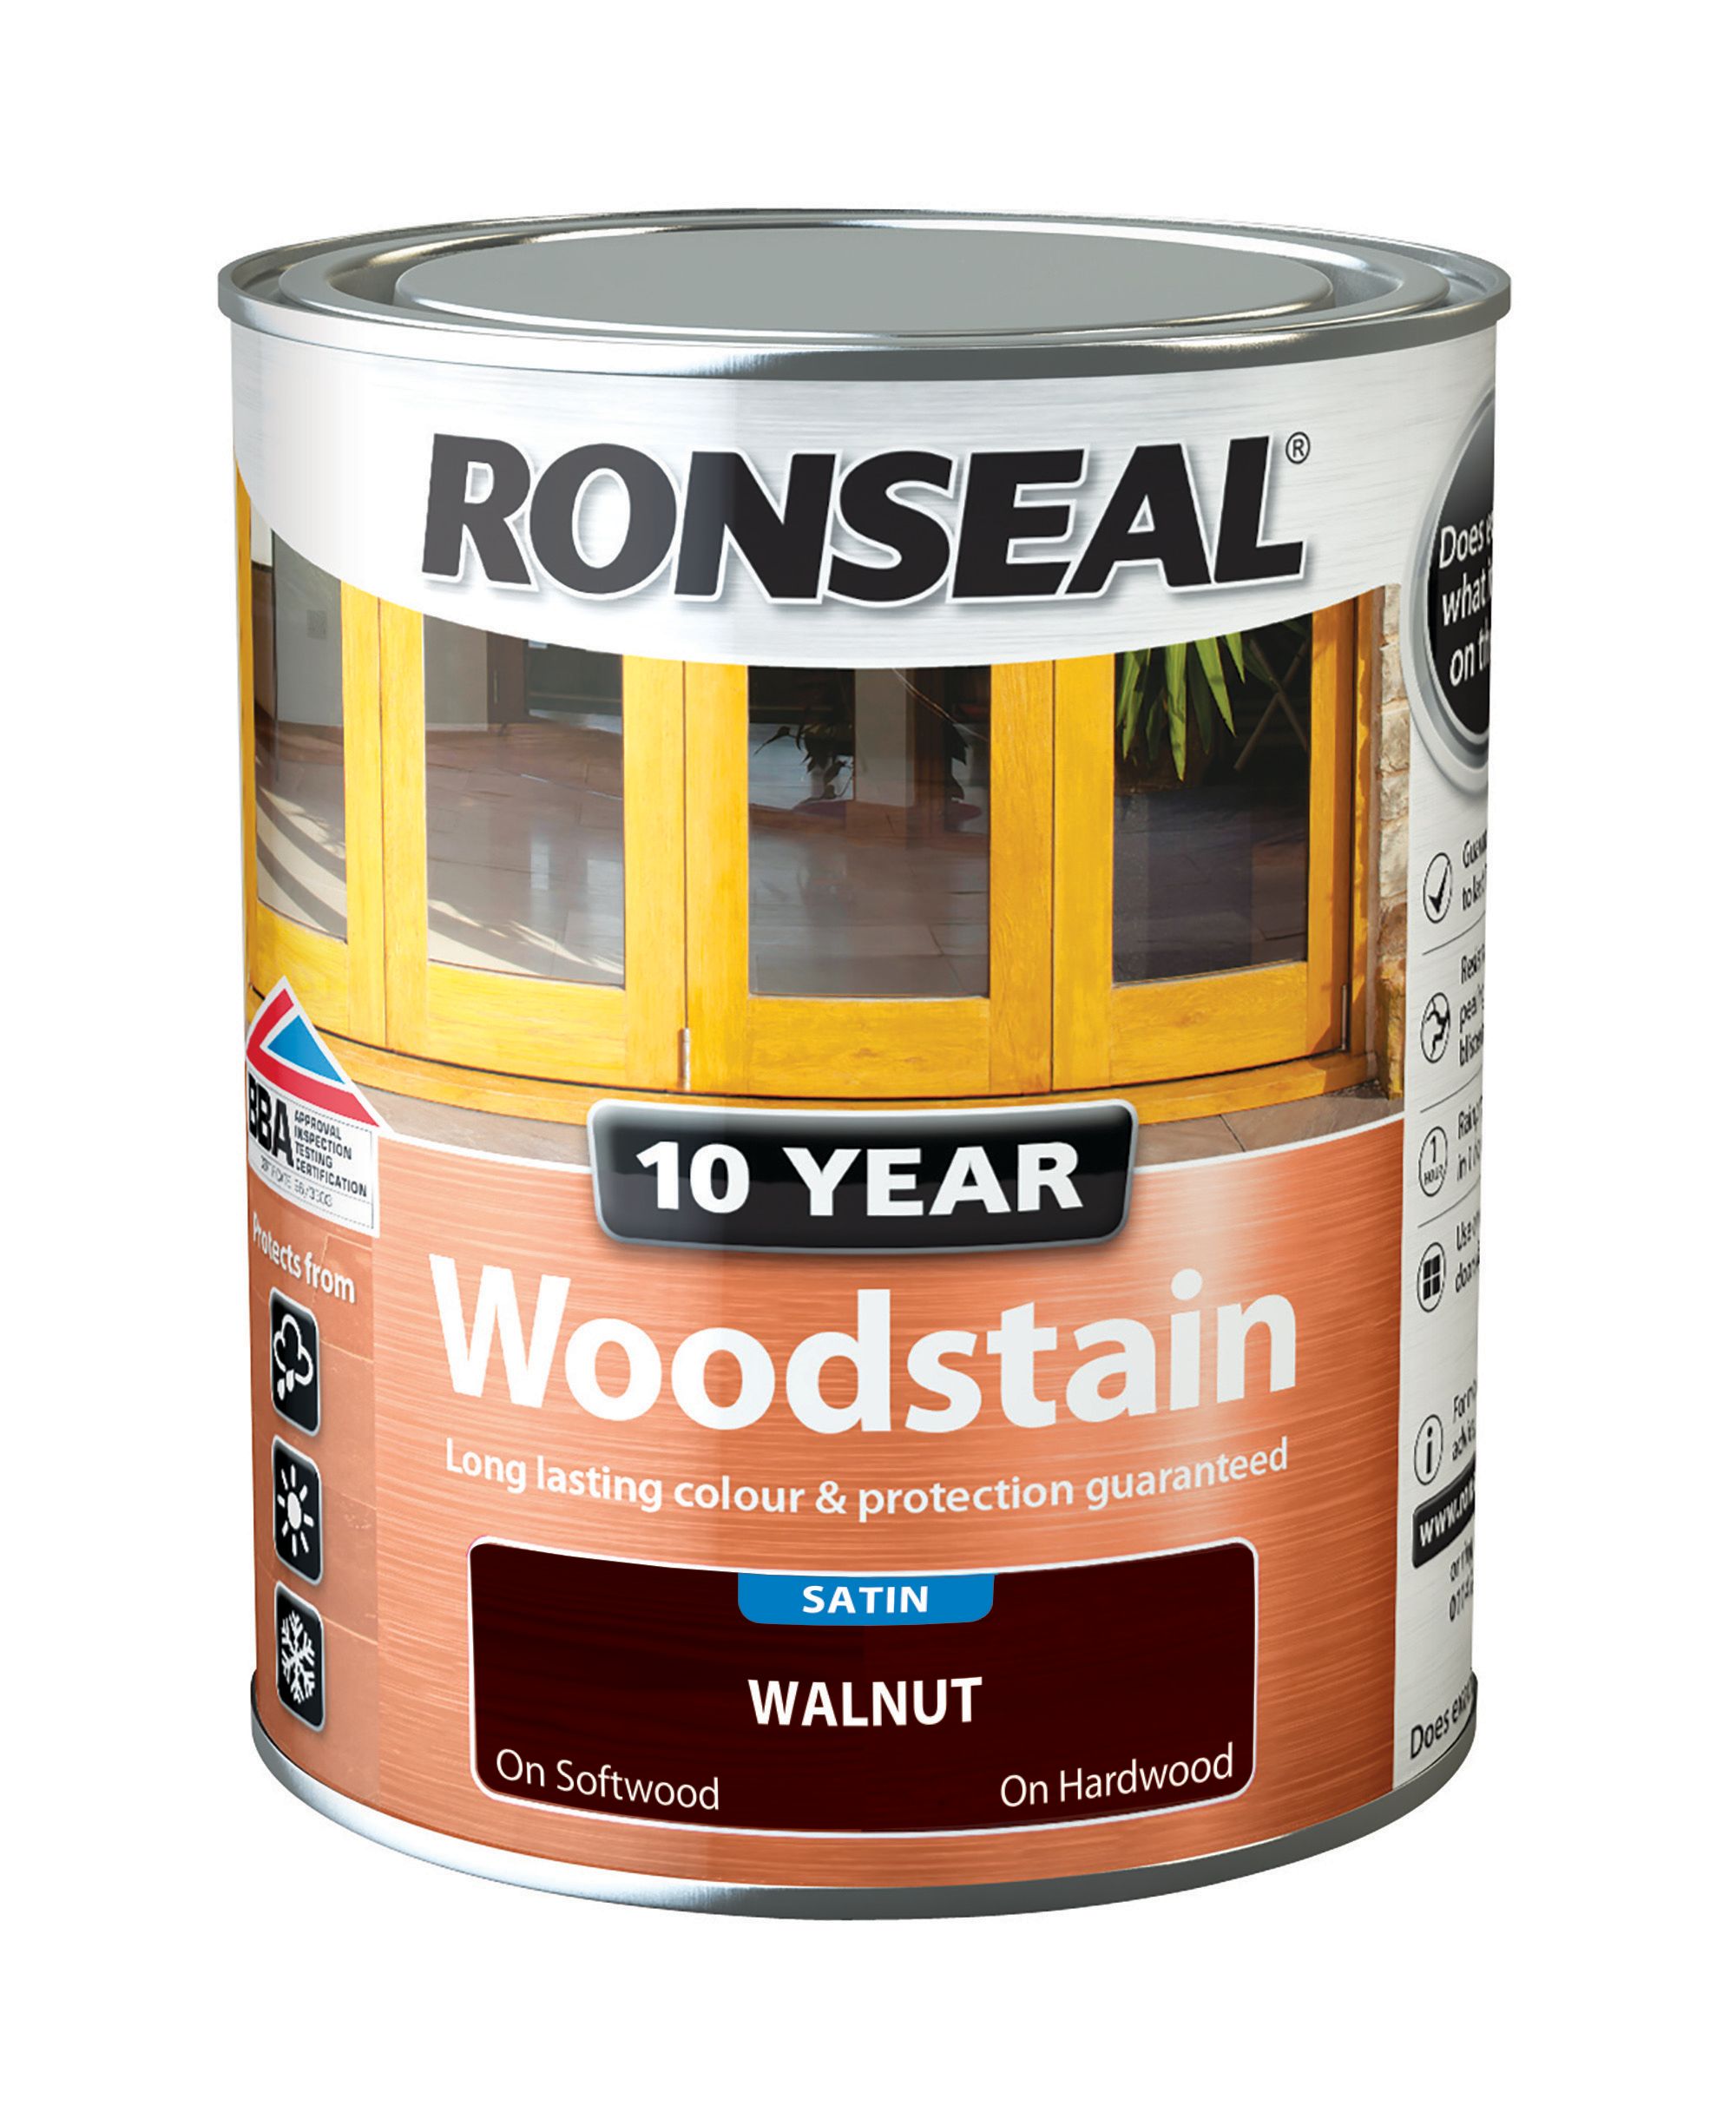 Image of Ronseal 10 Year Woodstain - Walnut 750ml